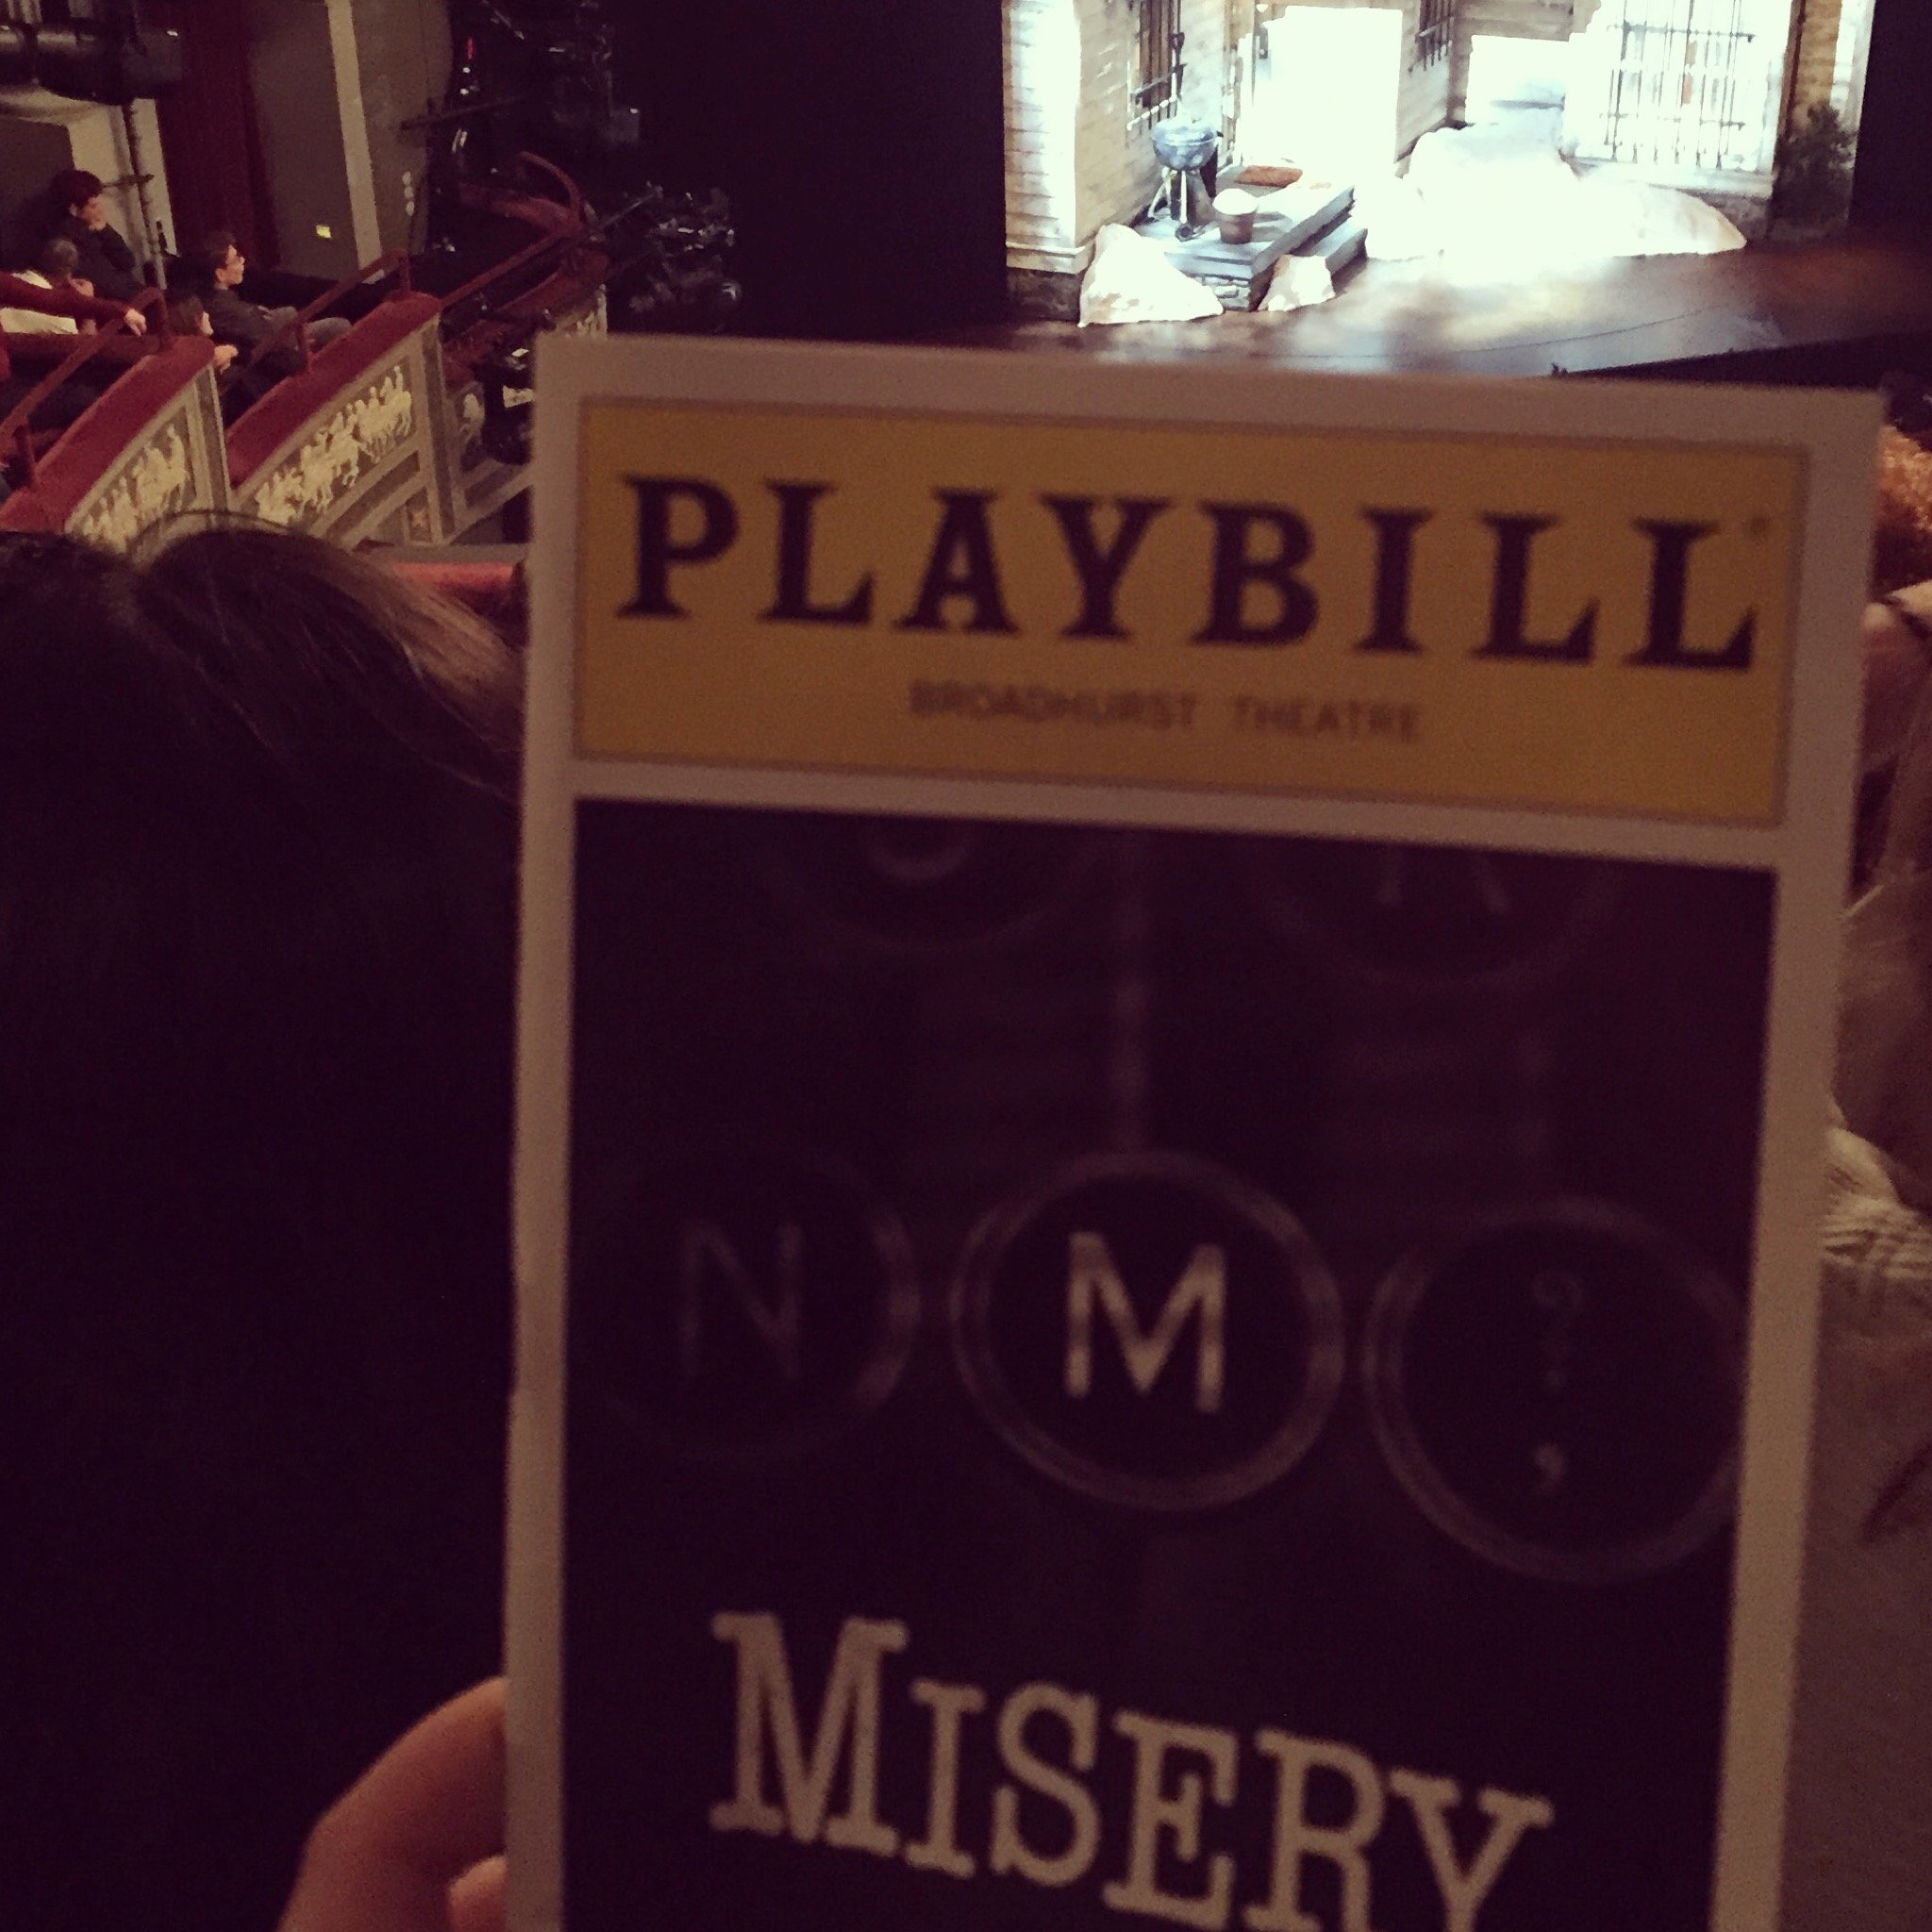 misery, misery on broadway, misery broadway, misery play, nyc shows, broadway shows, bruce willis, reviews, entertainment